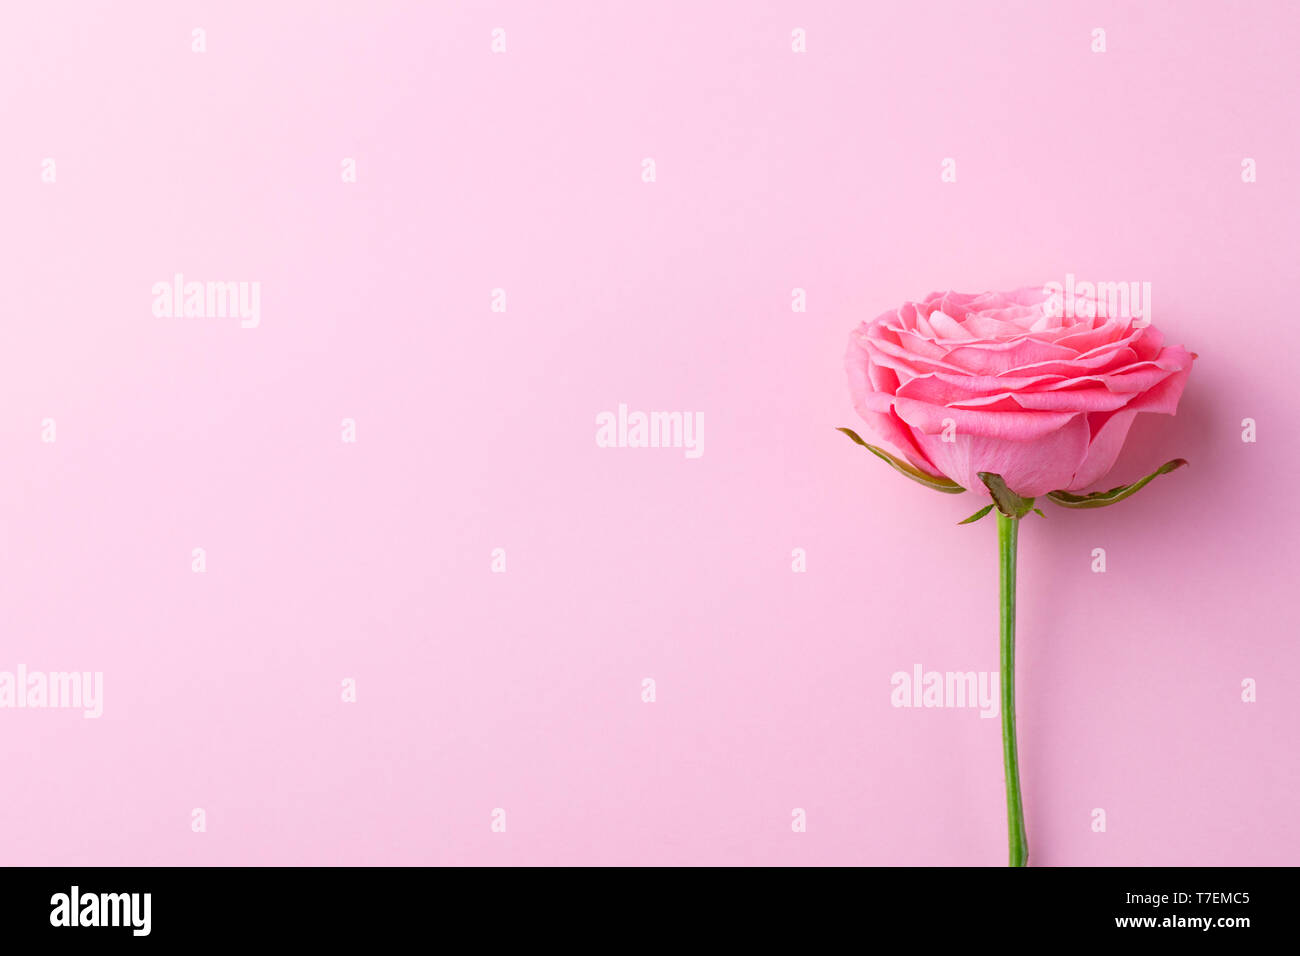 Rose flower on pink background. Top view. Copy space. Stock Photo